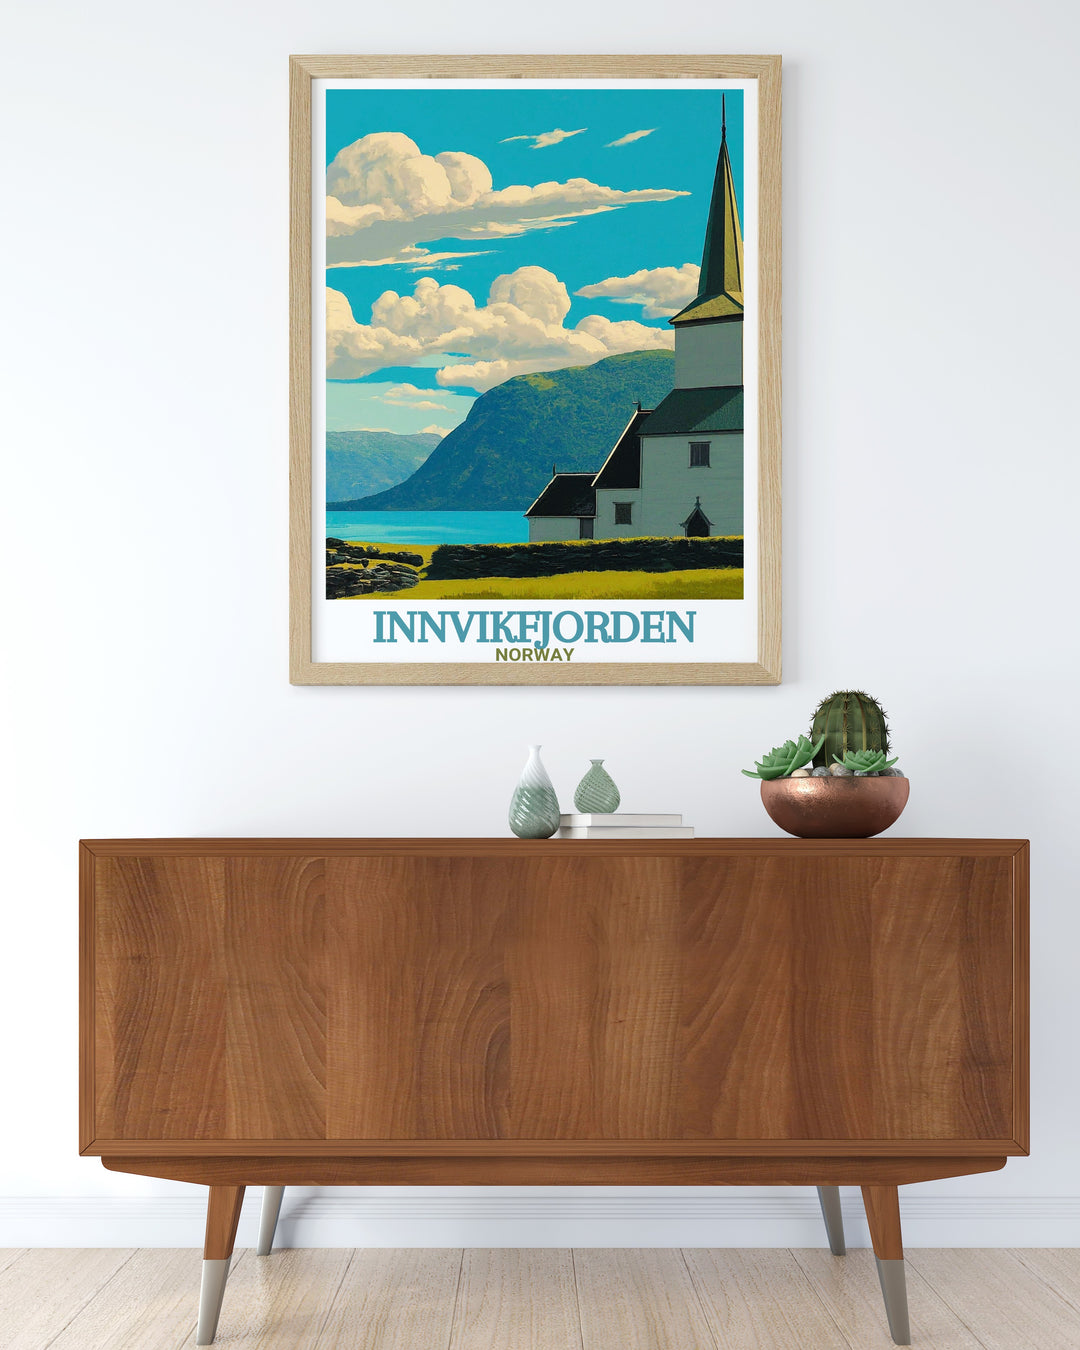 Exquisite Innvik Church travel poster illustrating the stunning fjord cliffs and tranquil waters of Norway nature ideal for art enthusiasts